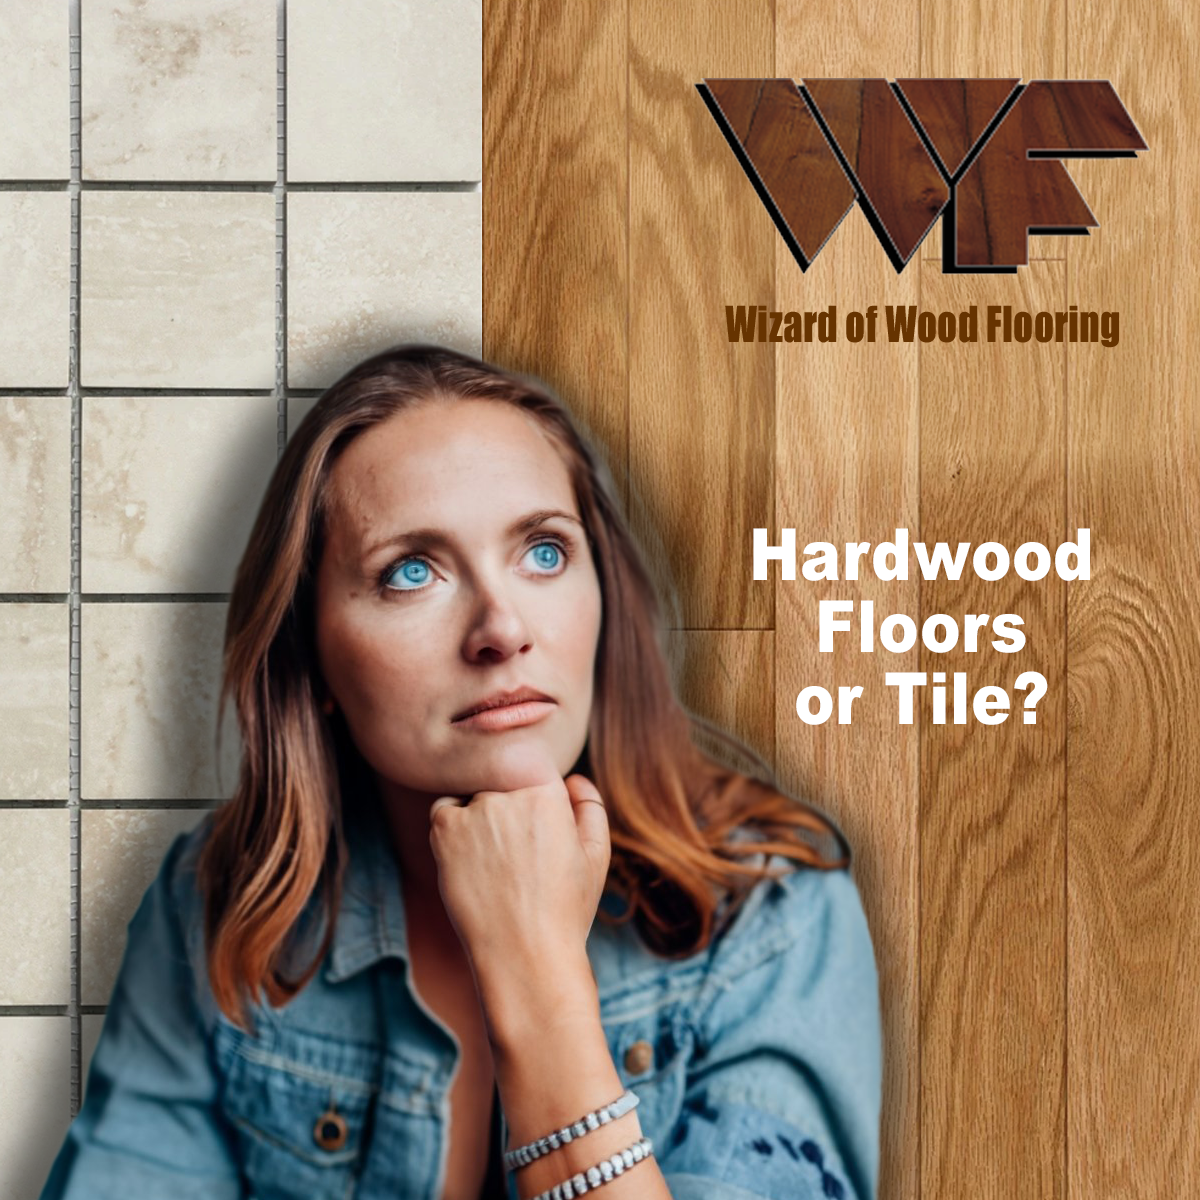 Tile vs. Wood Flooring: Which Is the Better Choice?